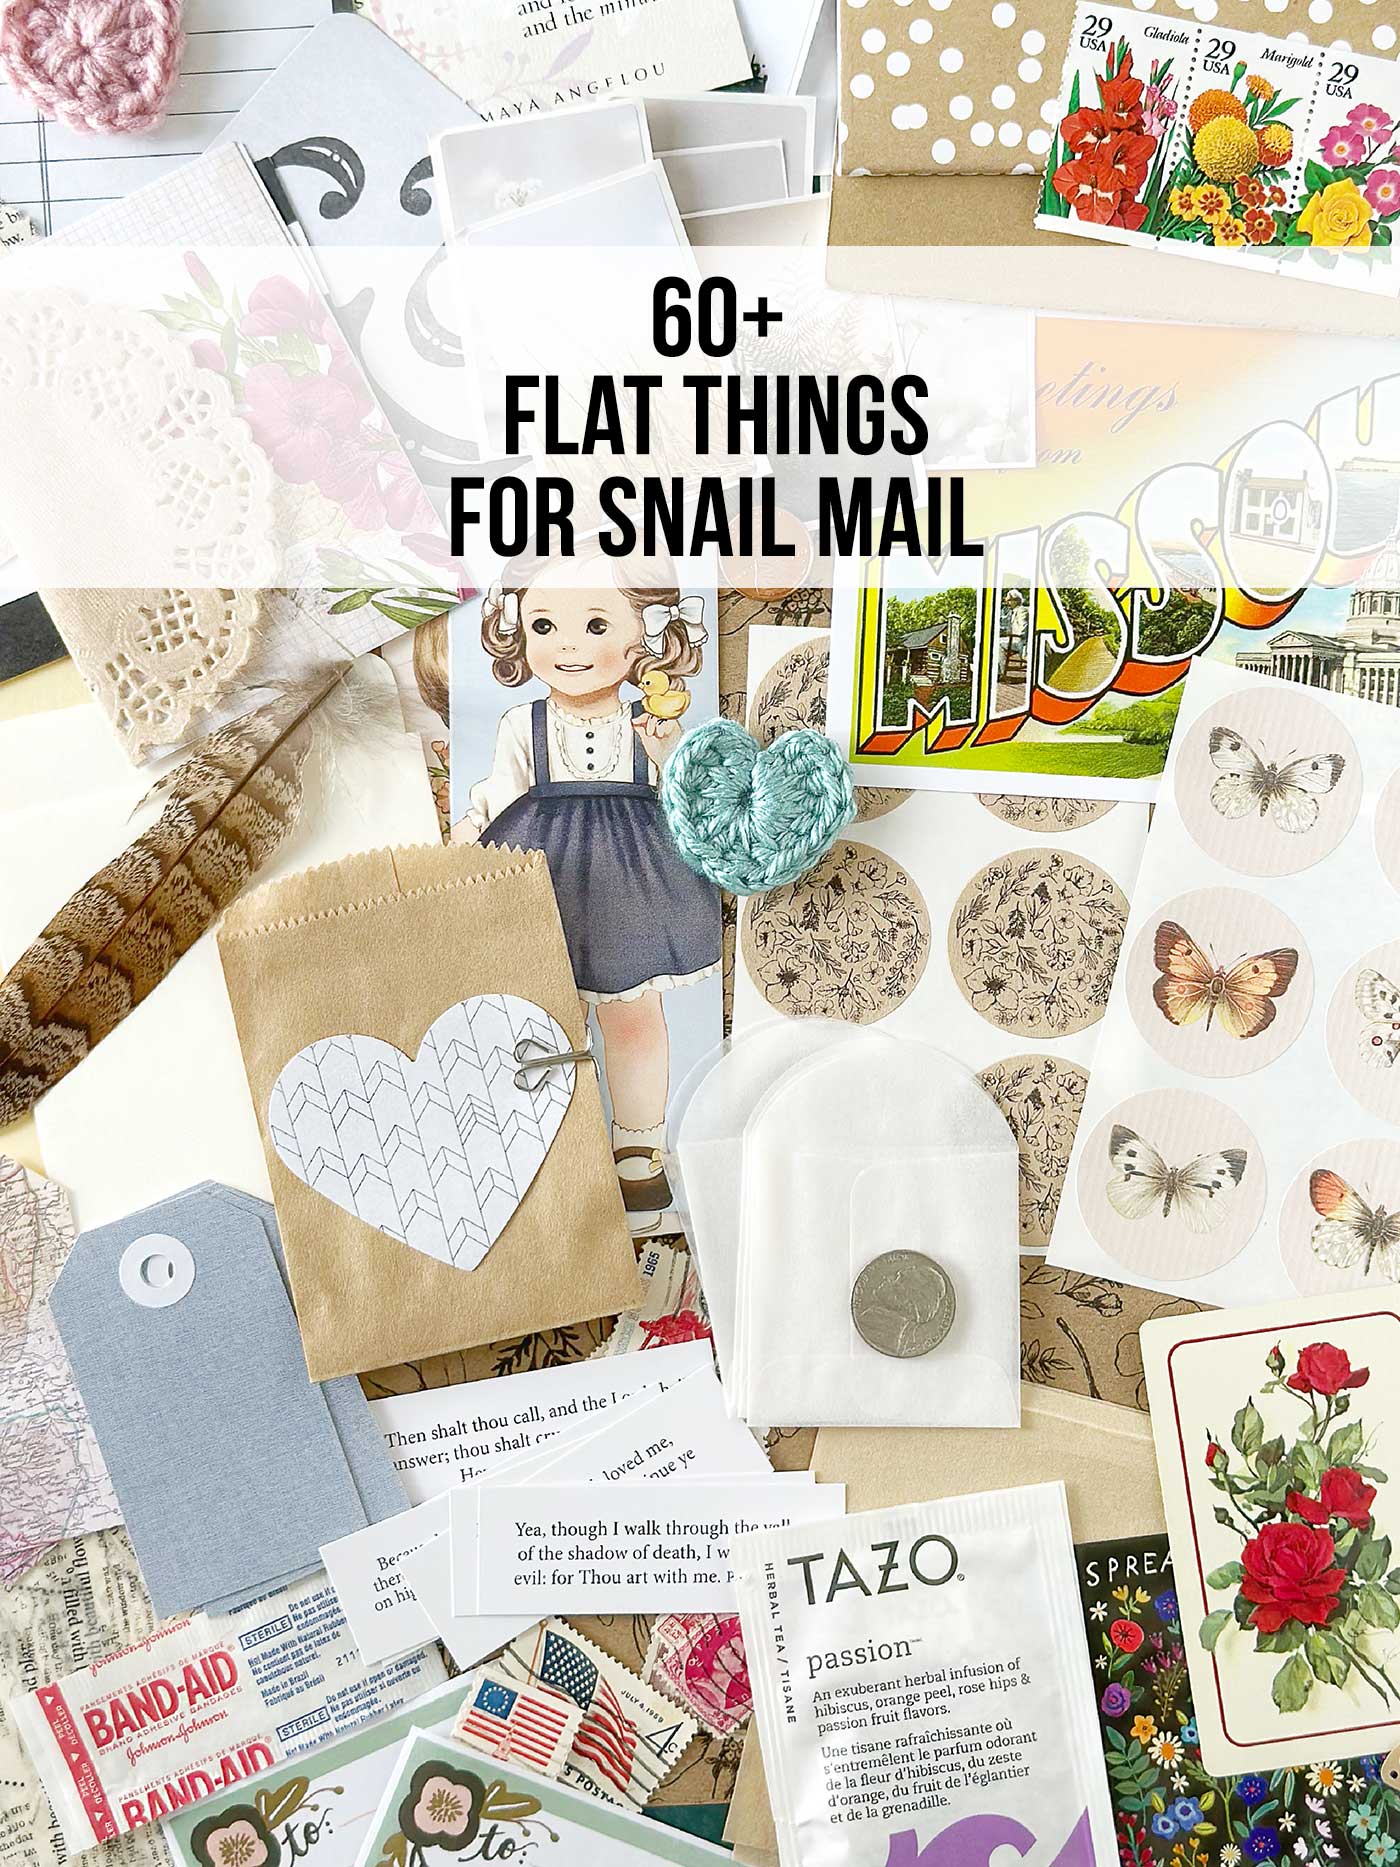 Collage of Flat Things for Snail Mail